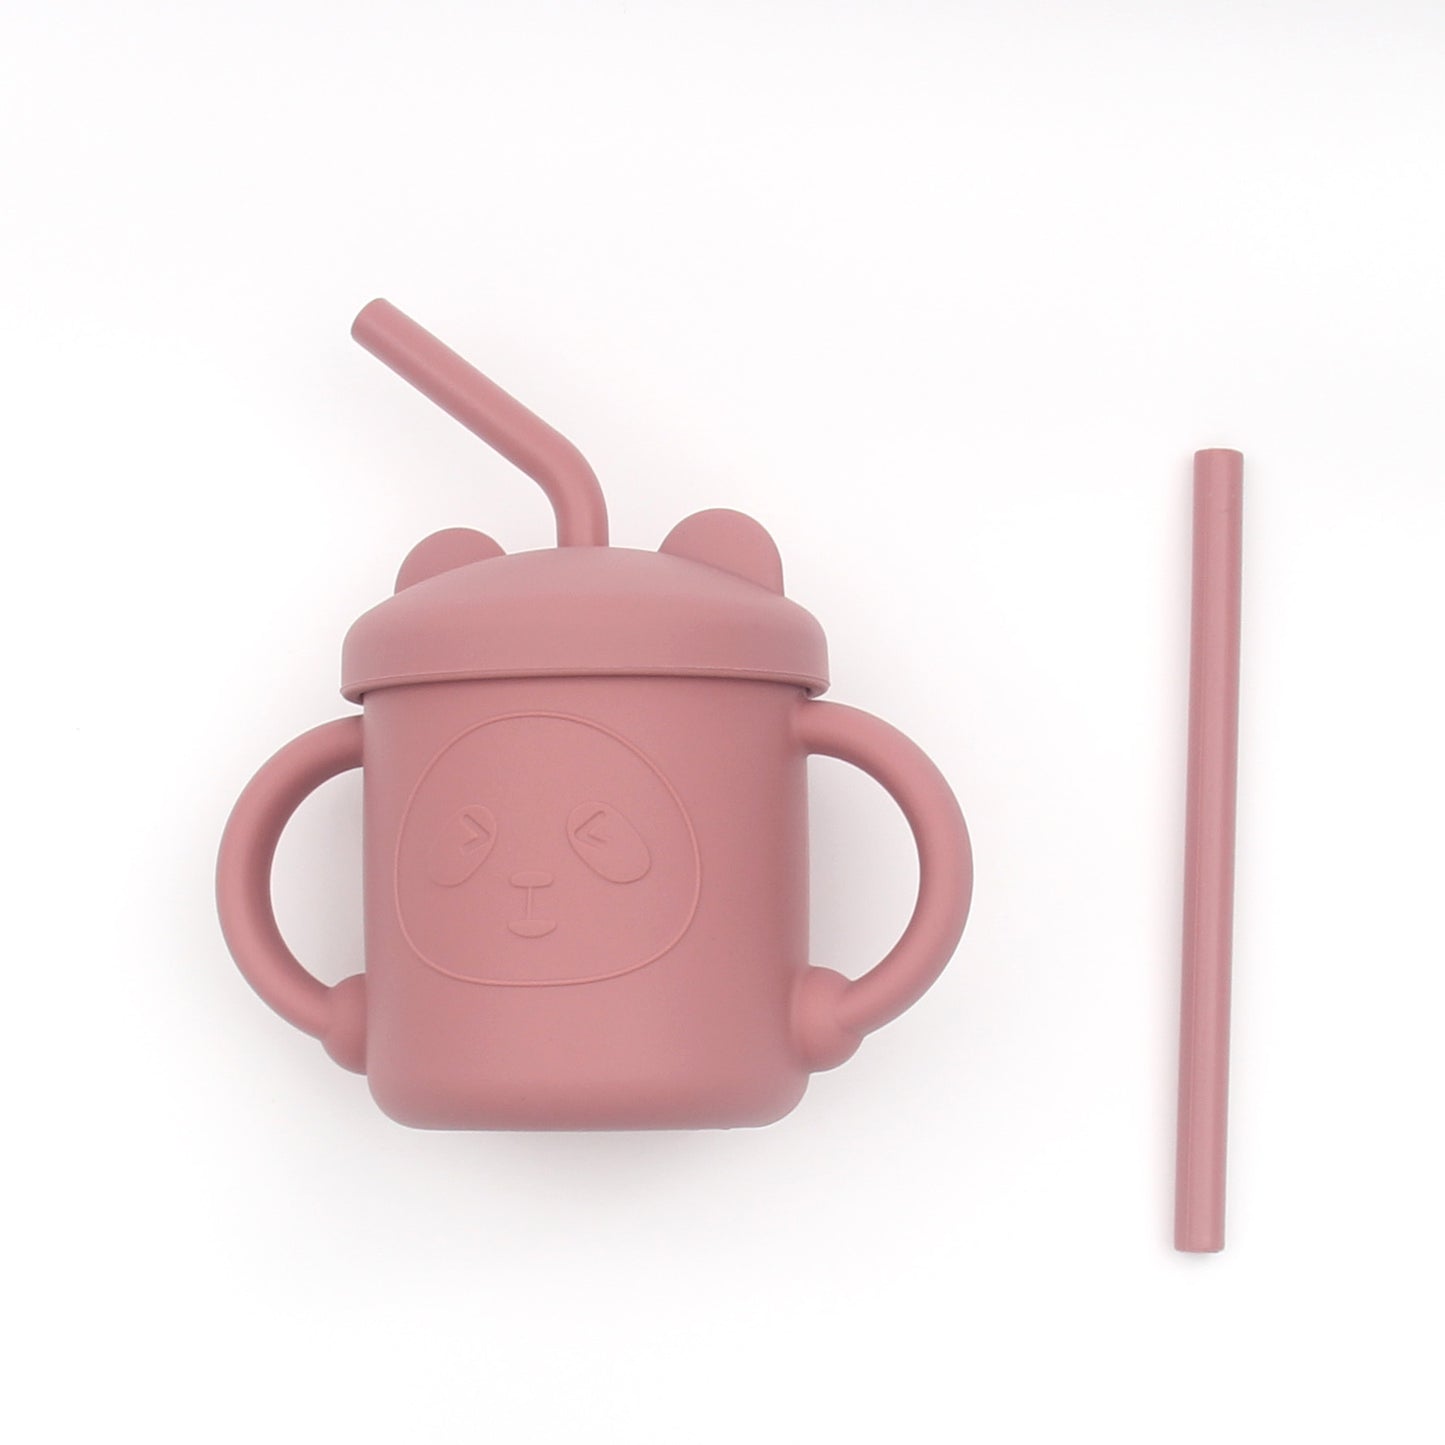 Smoosh Sippy Training Cup for infants